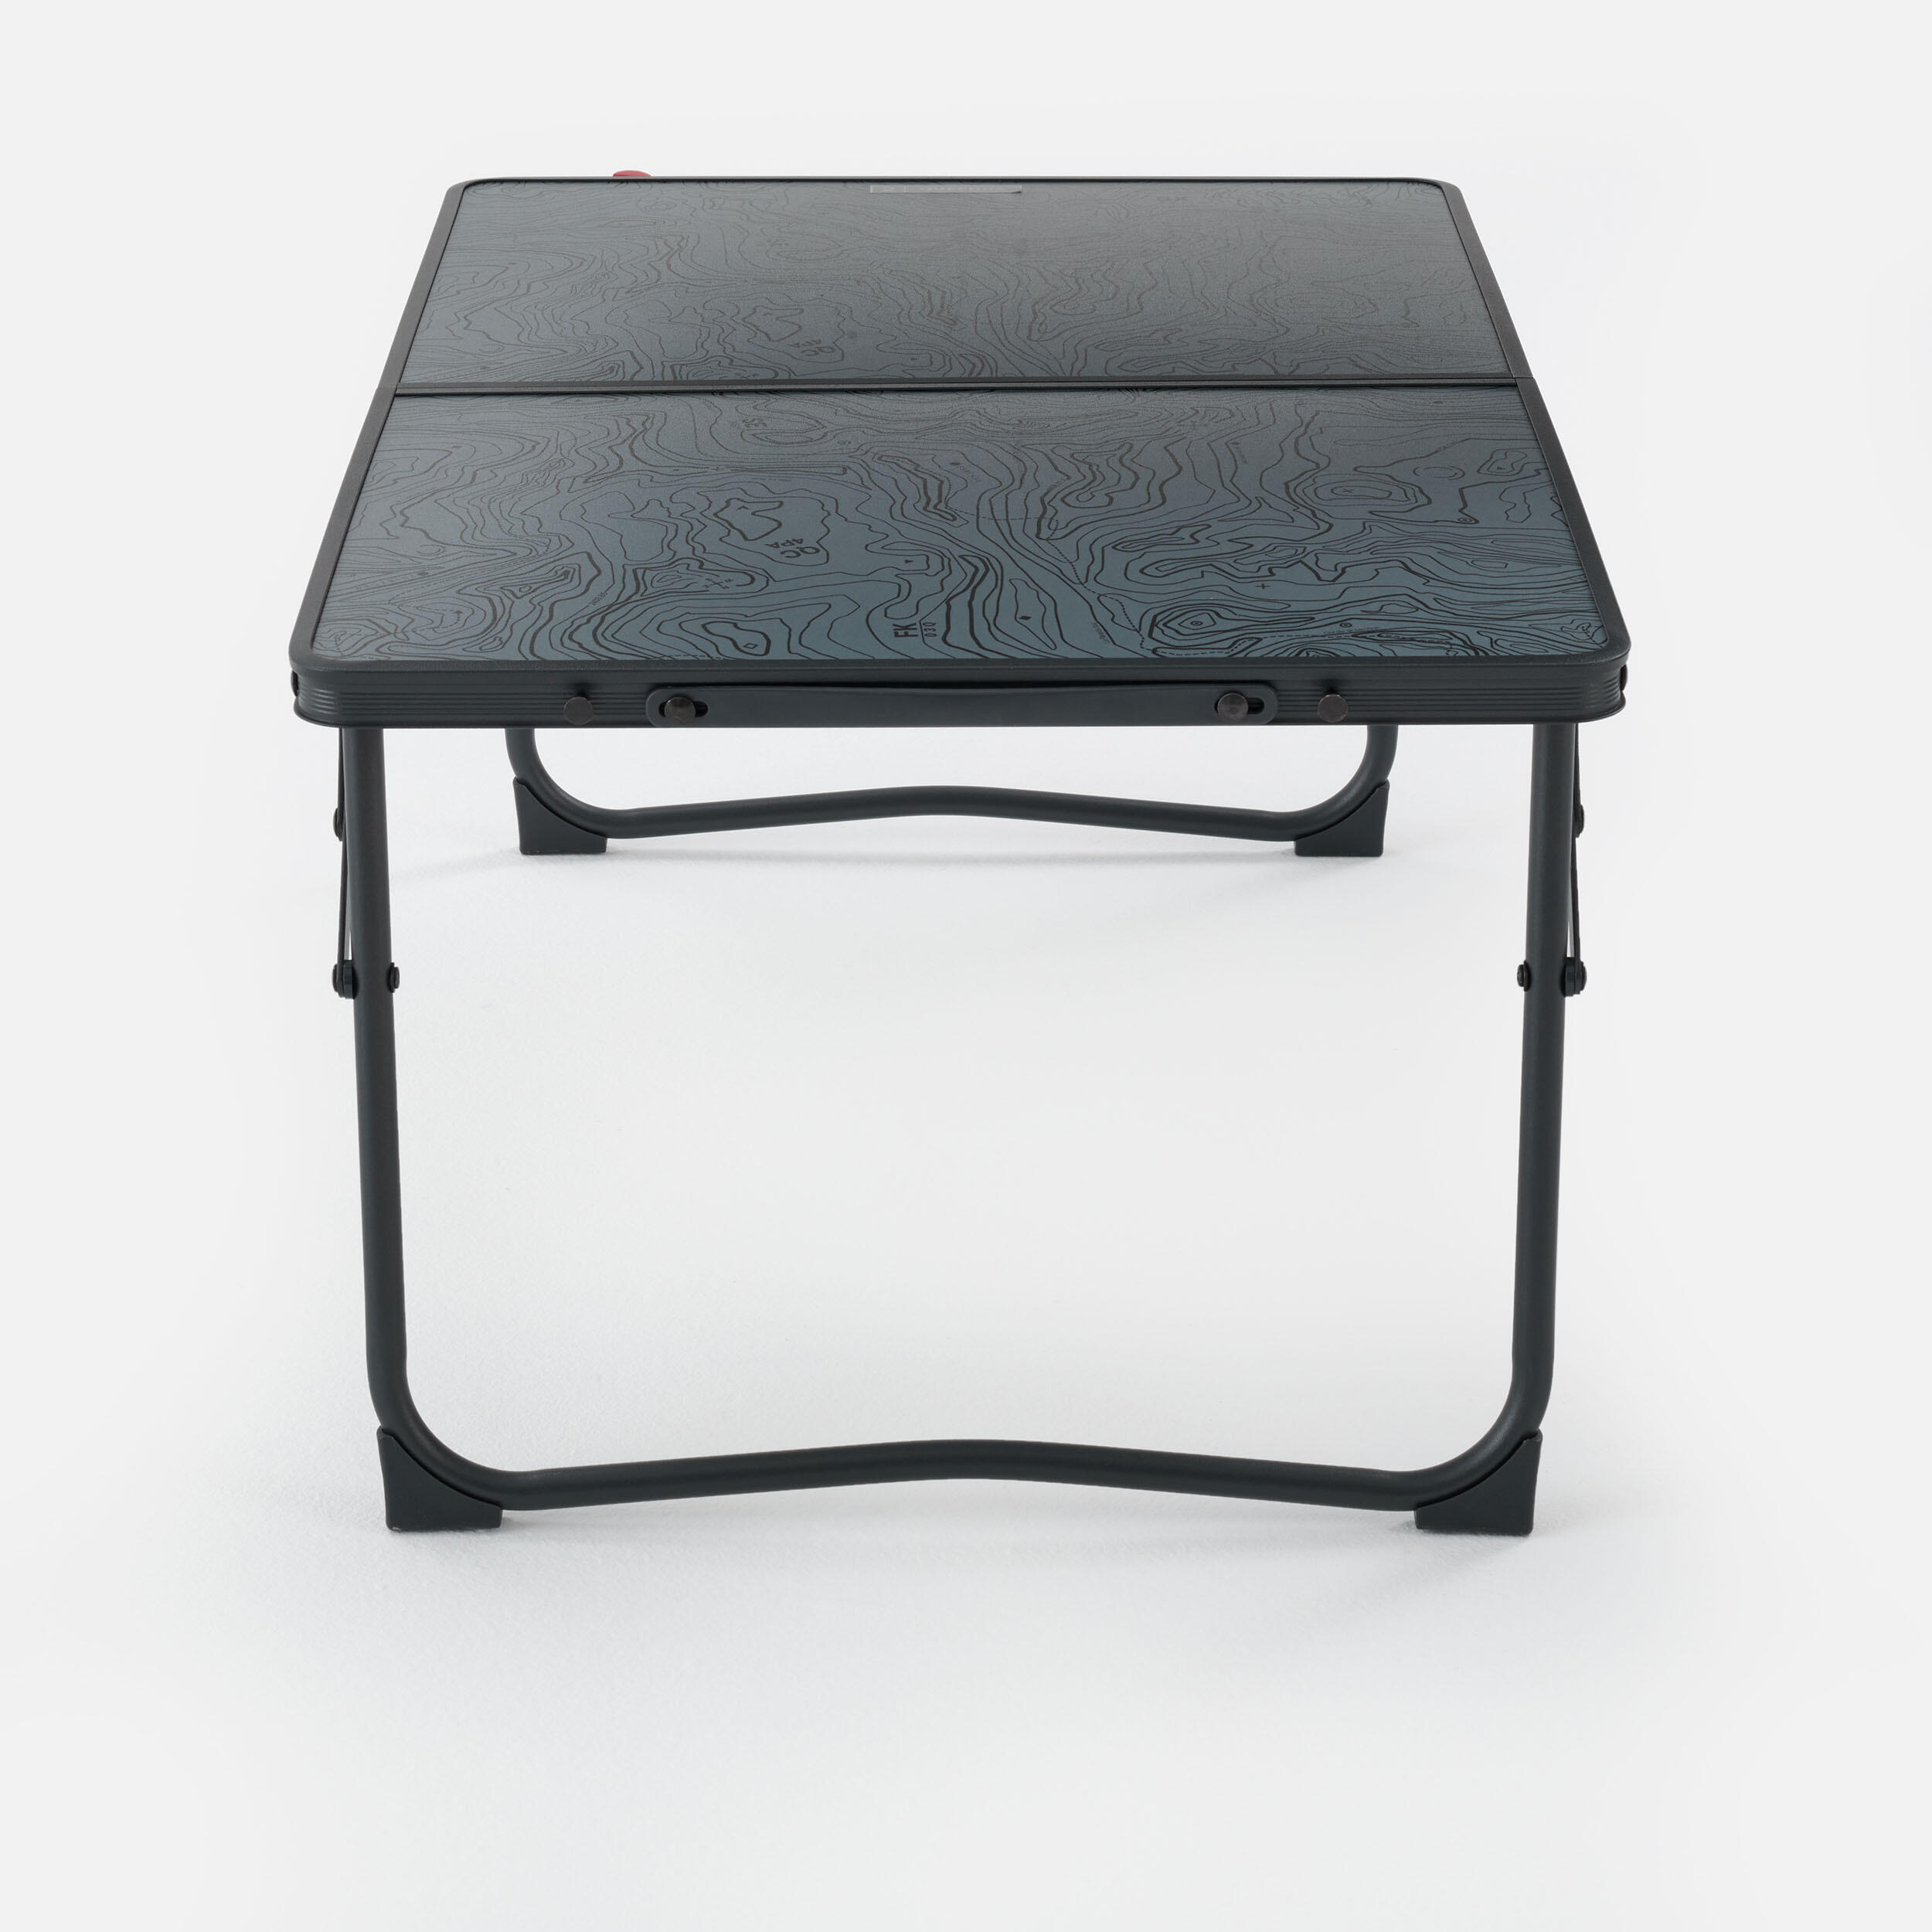 LOW FOLDING CAMPING TABLE - MH100 - GREY 4/10